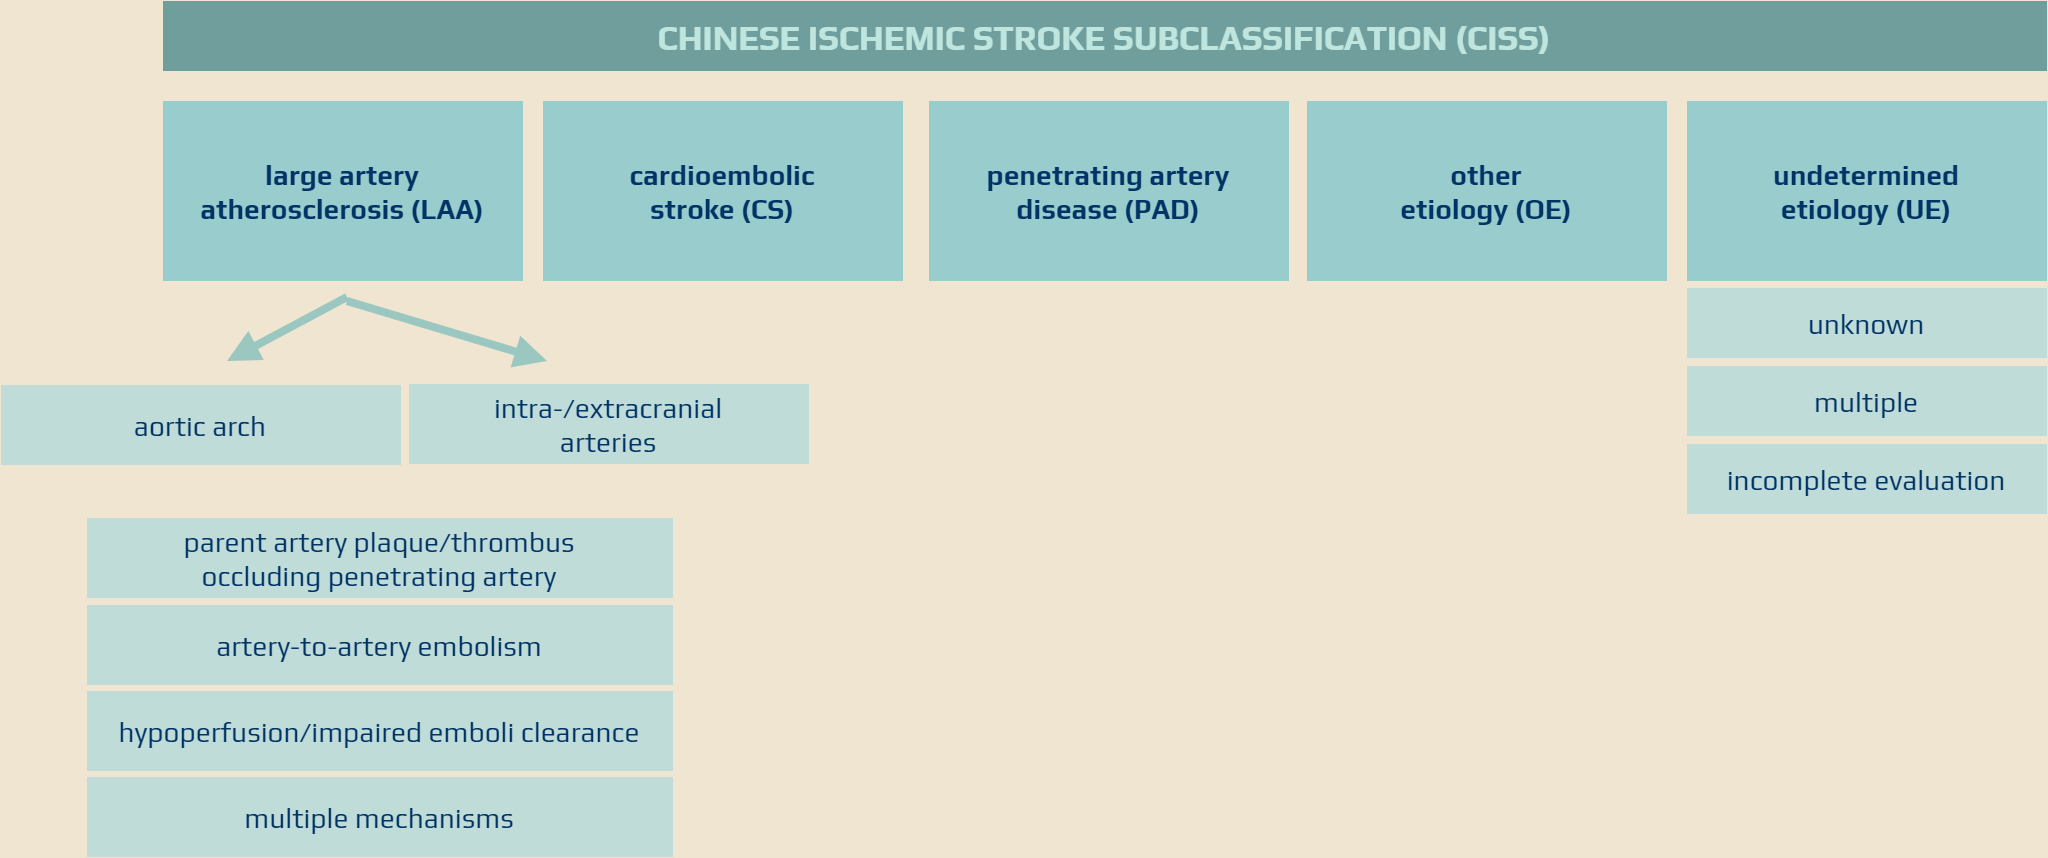 Chinese Ischemic Stroke Subclassification (CISS)